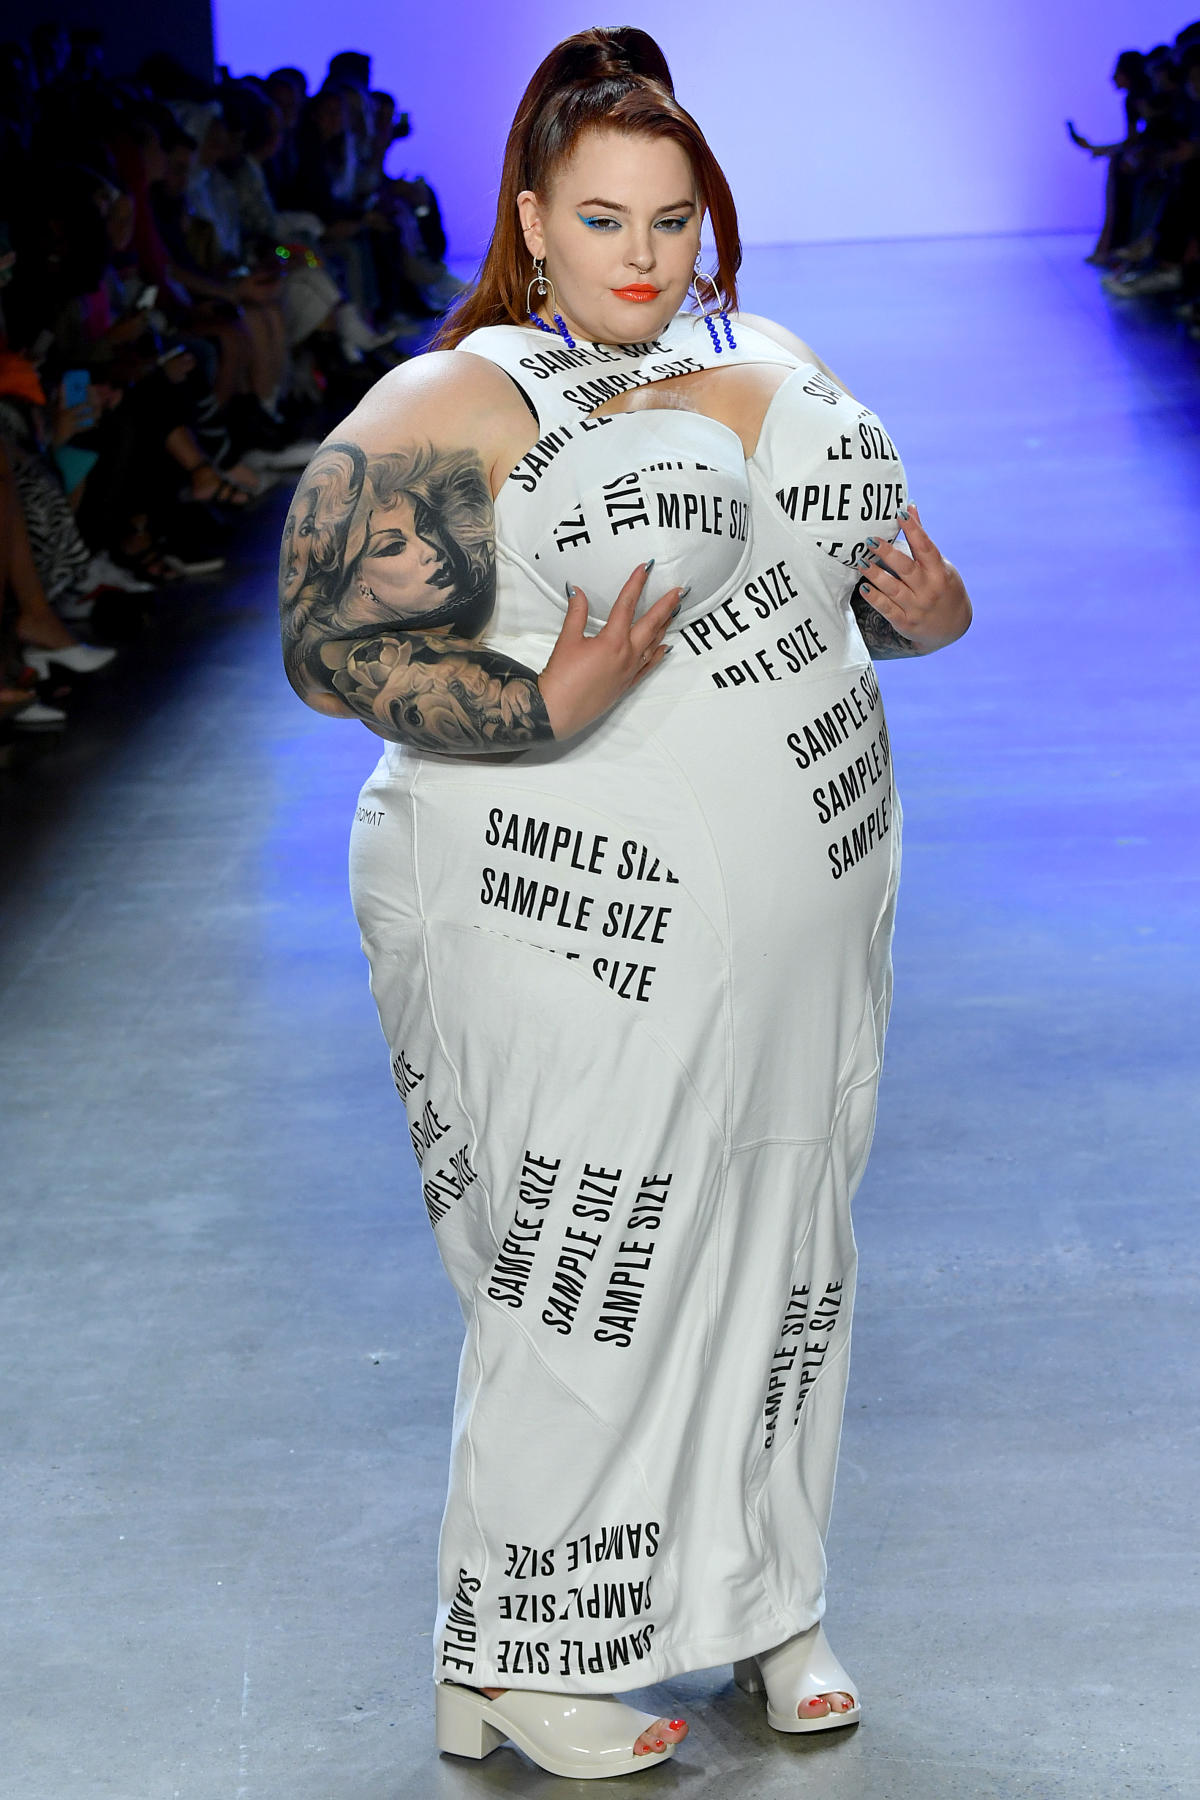 Curves take over the runway in plus-size show - The San Diego